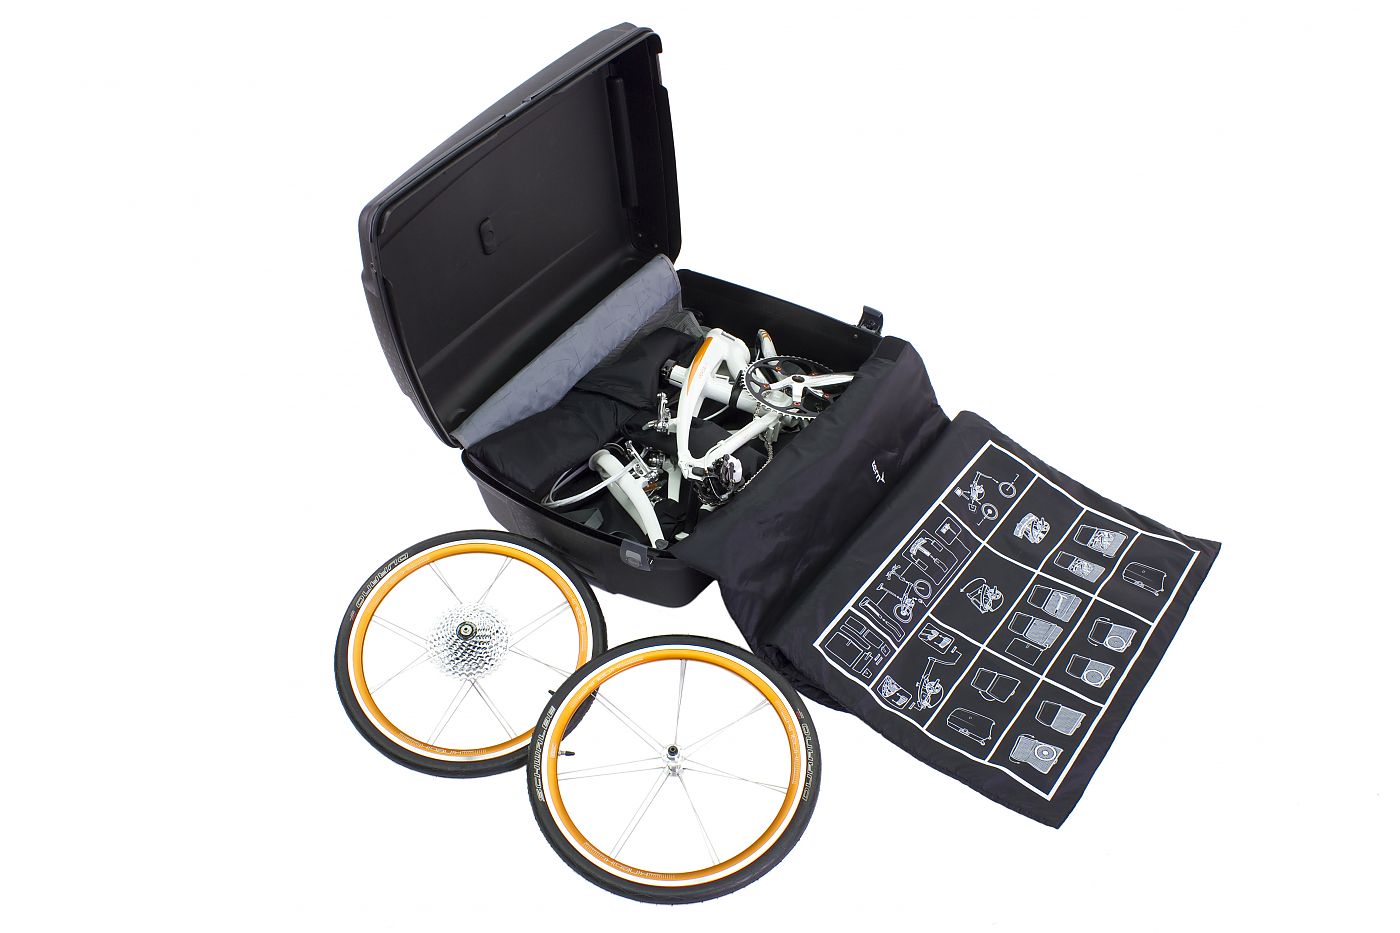 Tern kit allows bike to be packed in standard suitcase | Bicycle 